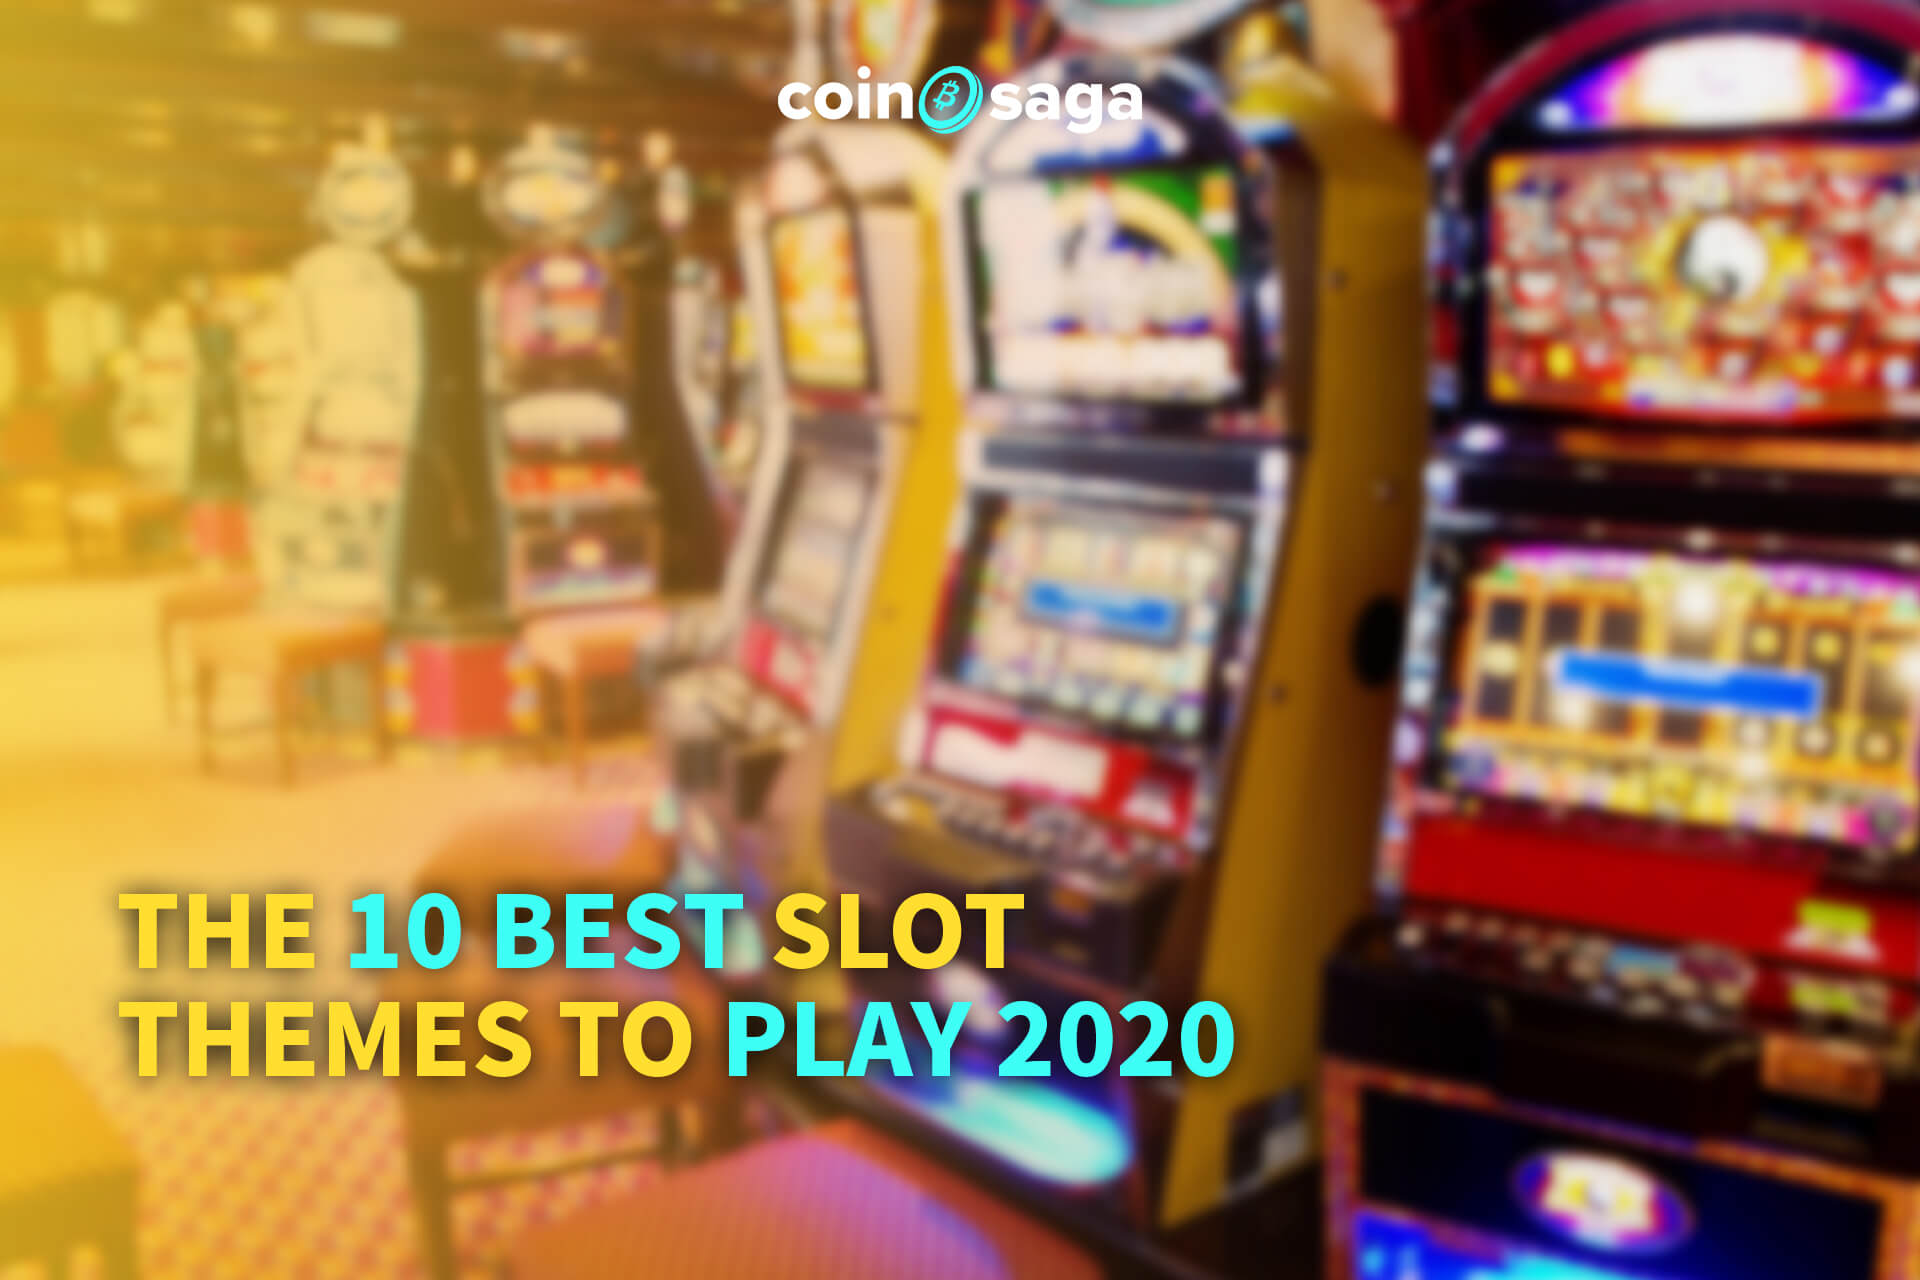 Best Slot themes to play 2020